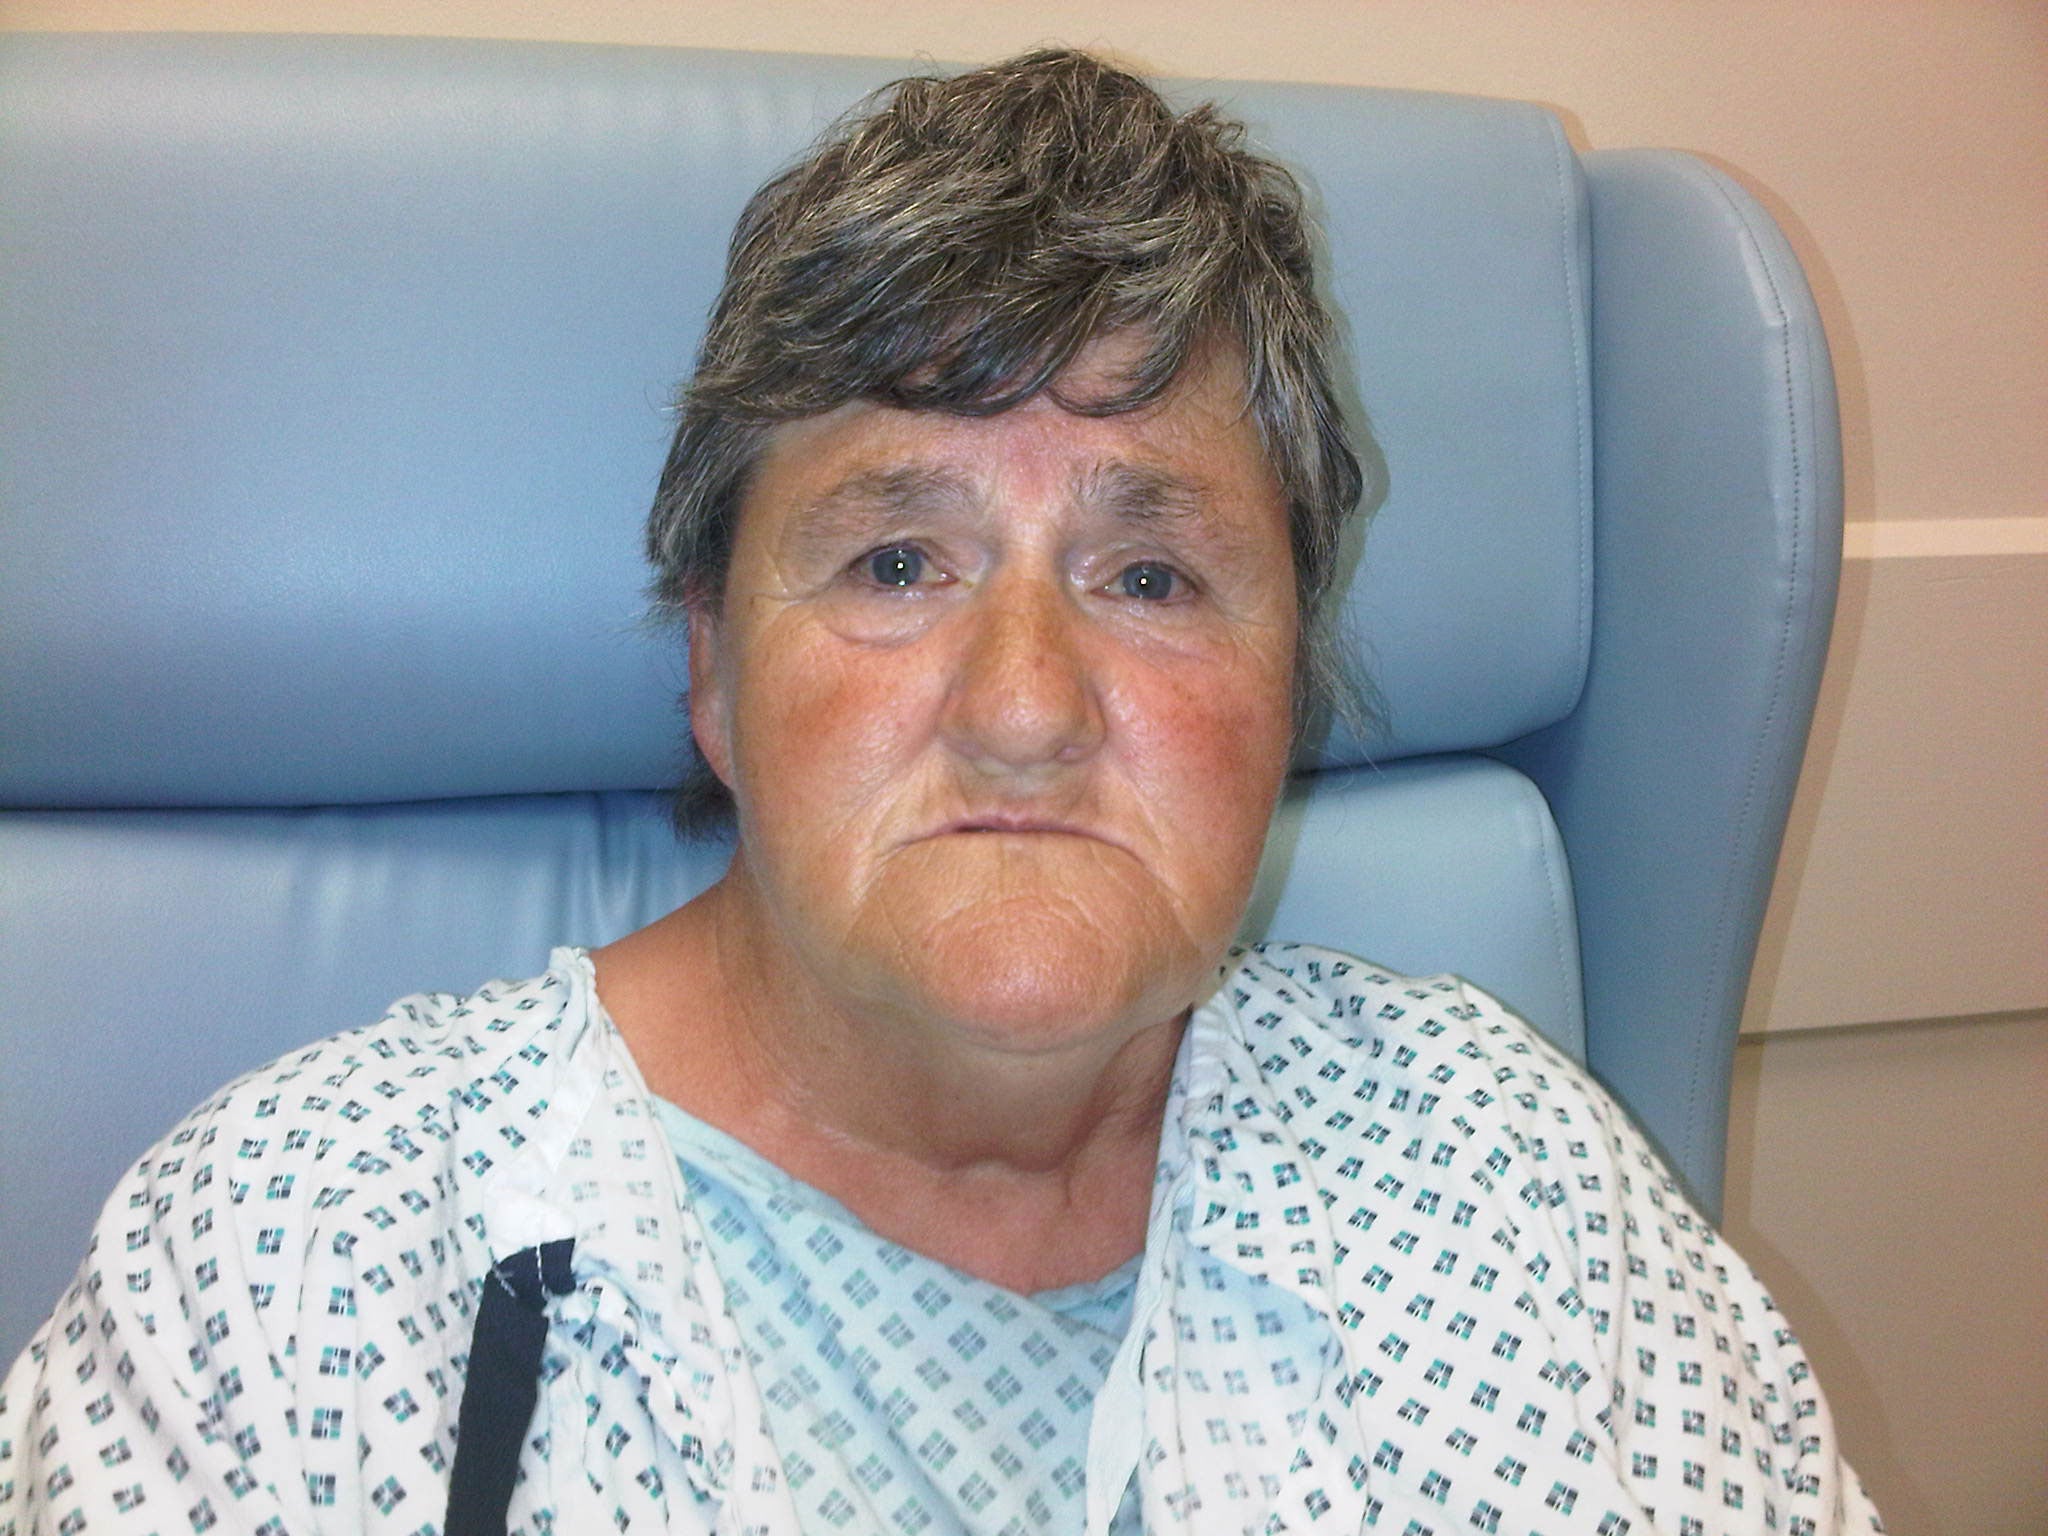 Gwent Police appeal for information about an unidentified woman who walked into Royal Gwent Hospital with no personal information and who does not remember her name